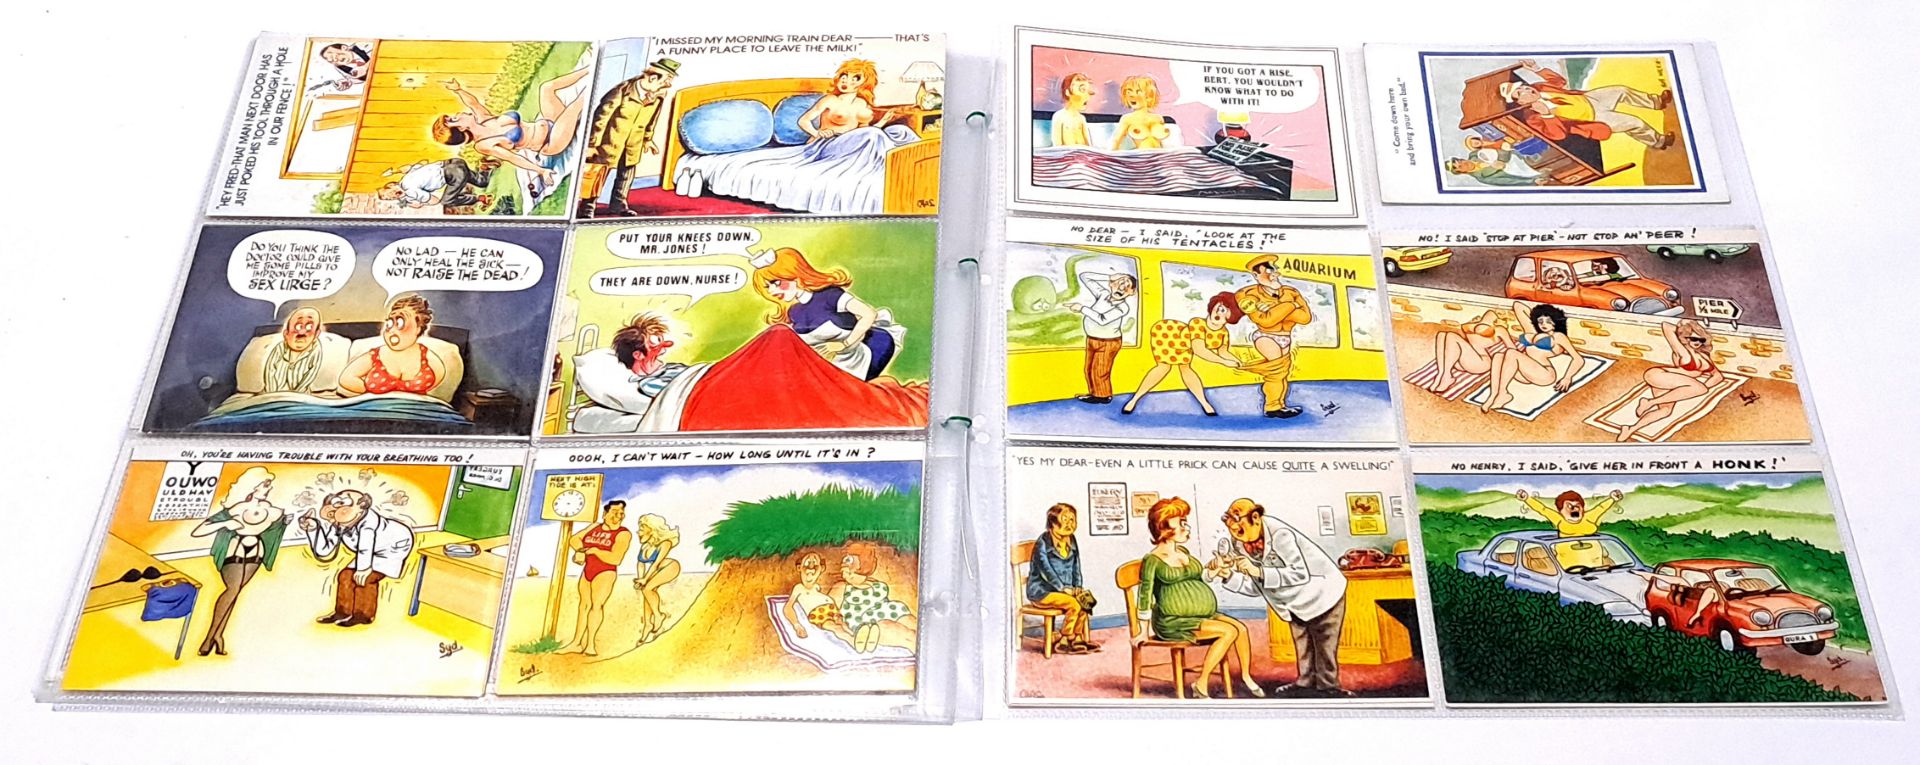 BAMFORTH Postcards "Comic Series", Saucy/Seaside Humour. Conditions generally appear Good to Near... - Image 2 of 3